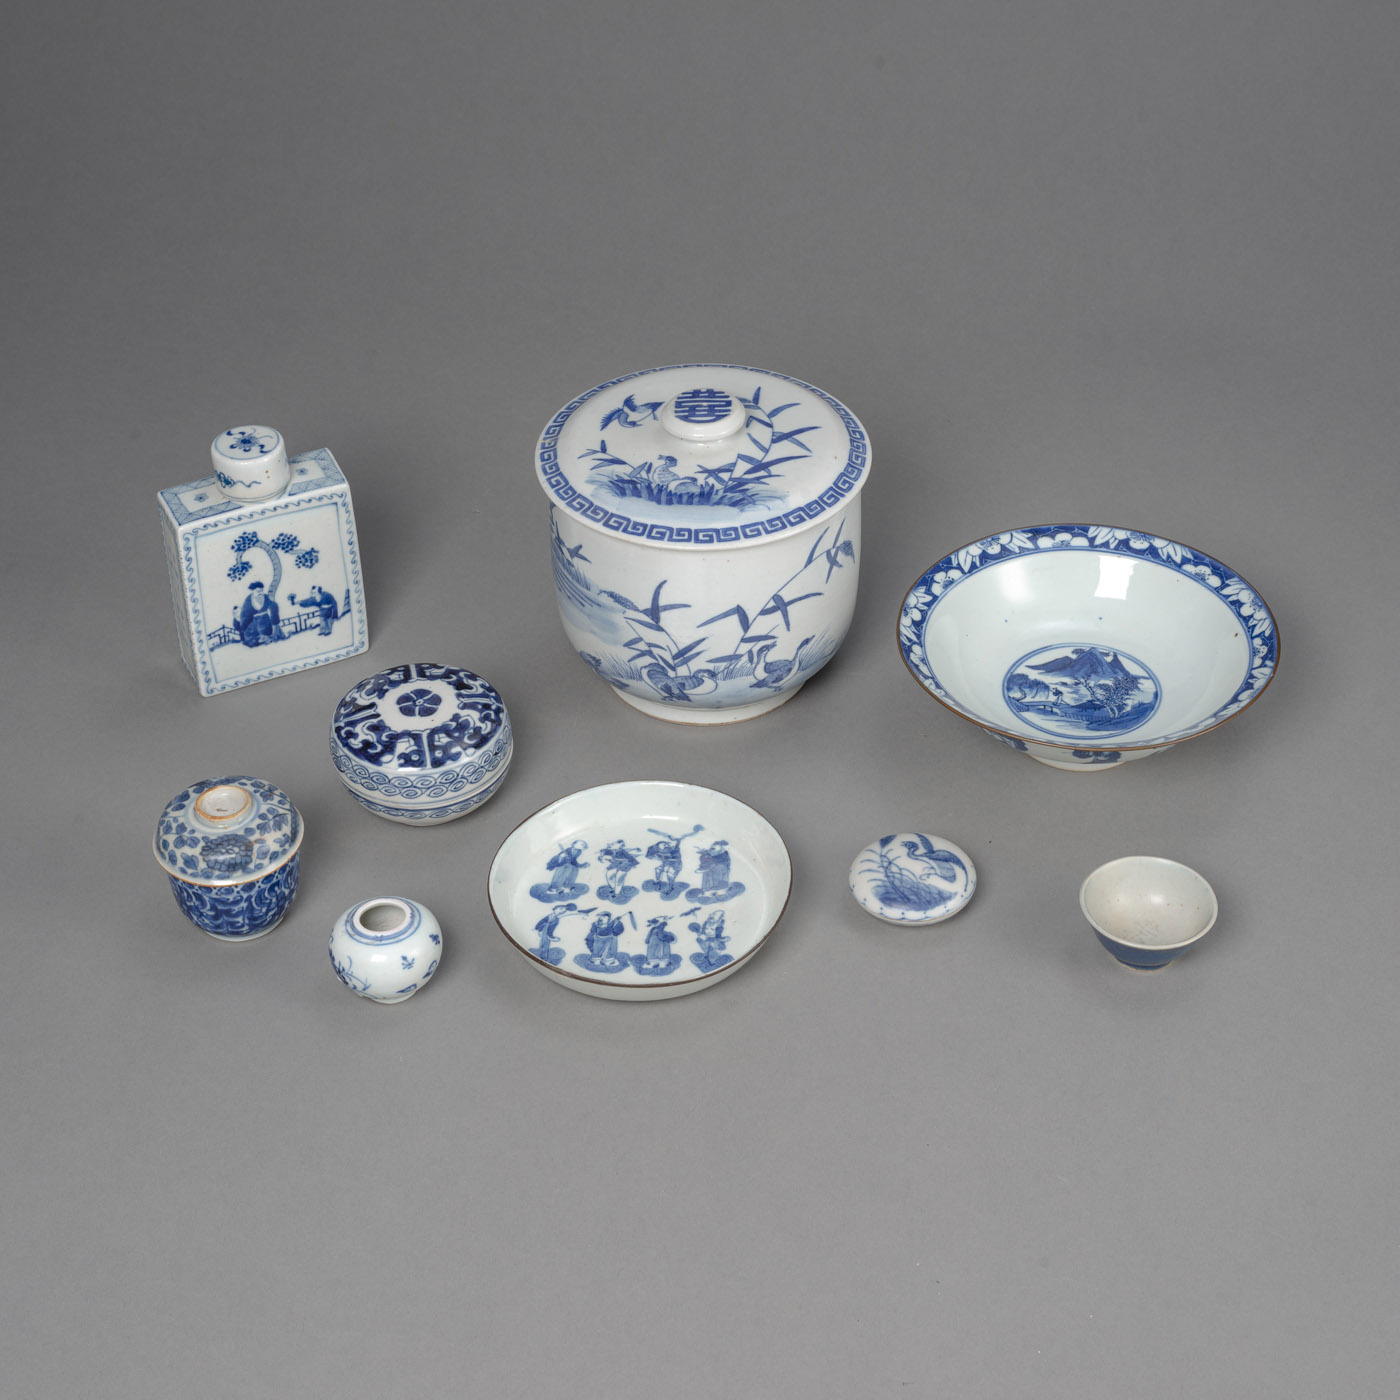 <b>A GROUP OF 9 BLUE AND WHITE PORCELAIN VESSELS AND BOWLS</b>